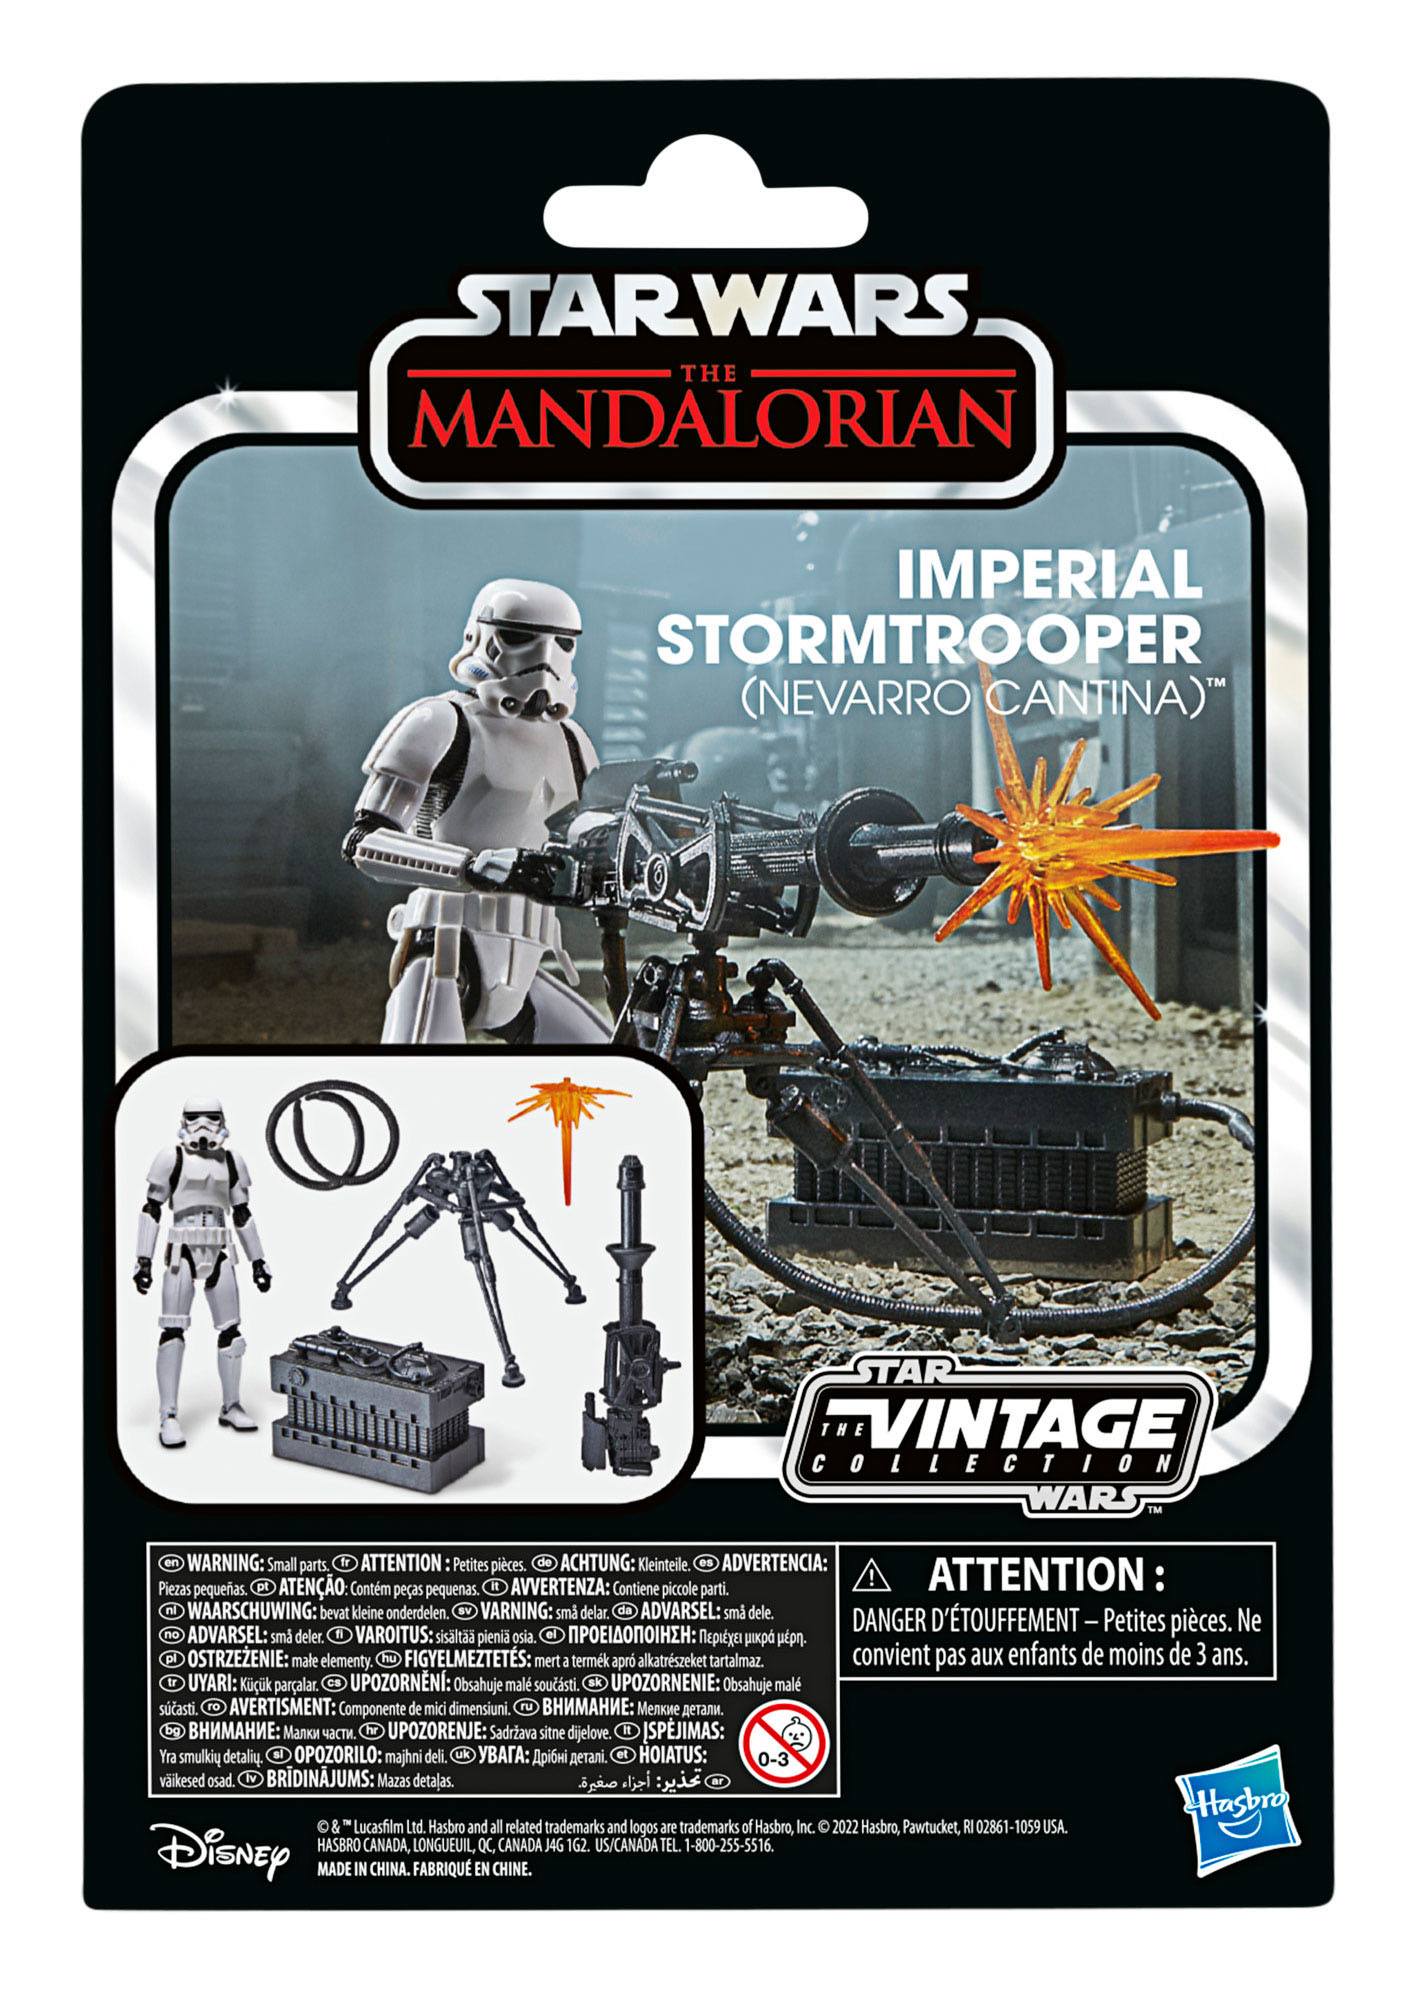 Star Wars The Vintage Collection Deluxe Imperial Stormtrooper (Nevarro Cantina) F55755L00 5010993965533